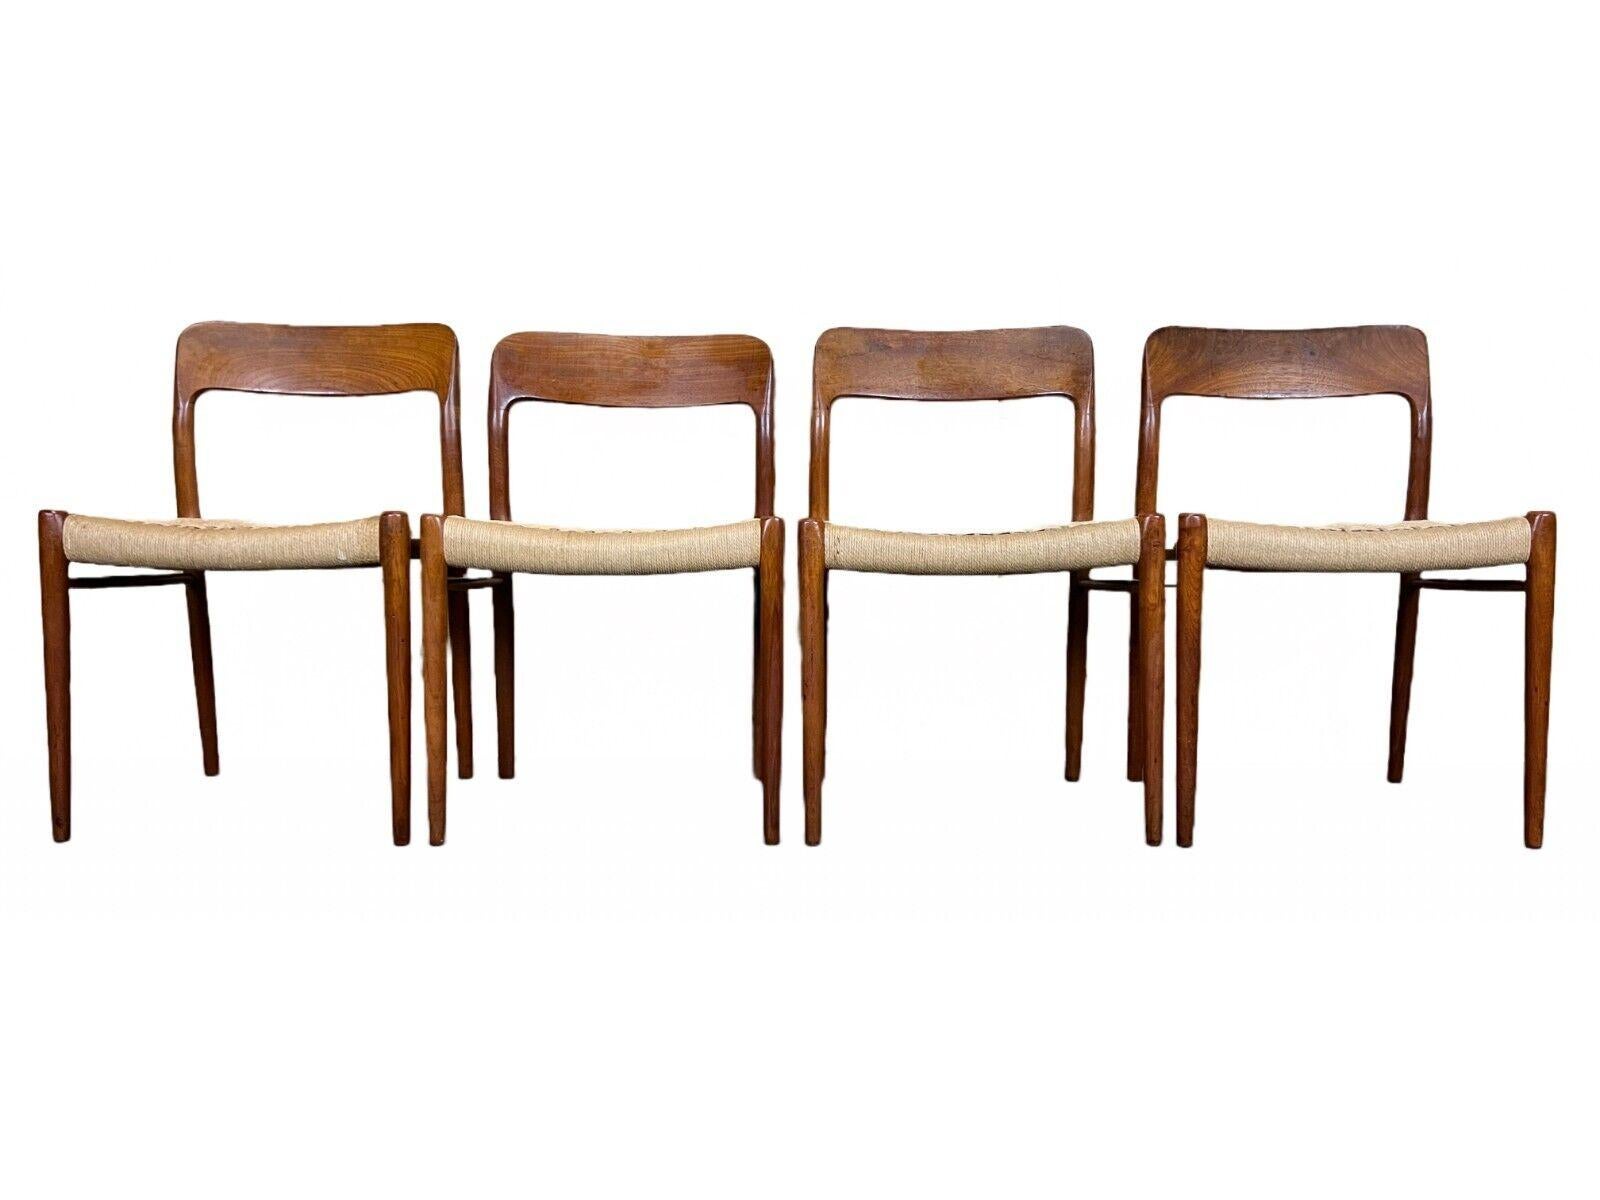 4x 60s 70s chairs teak dining chair Niels O. Möller for J.L. Moller's 60s

Object: 4x chair

Manufacturer: J.L. Mollers

Condition: good - vintage

Age: around 1960-1970

Dimensions:

Width = 50.5cm
Depth = 49.5cm
Height = 75cm
Seat